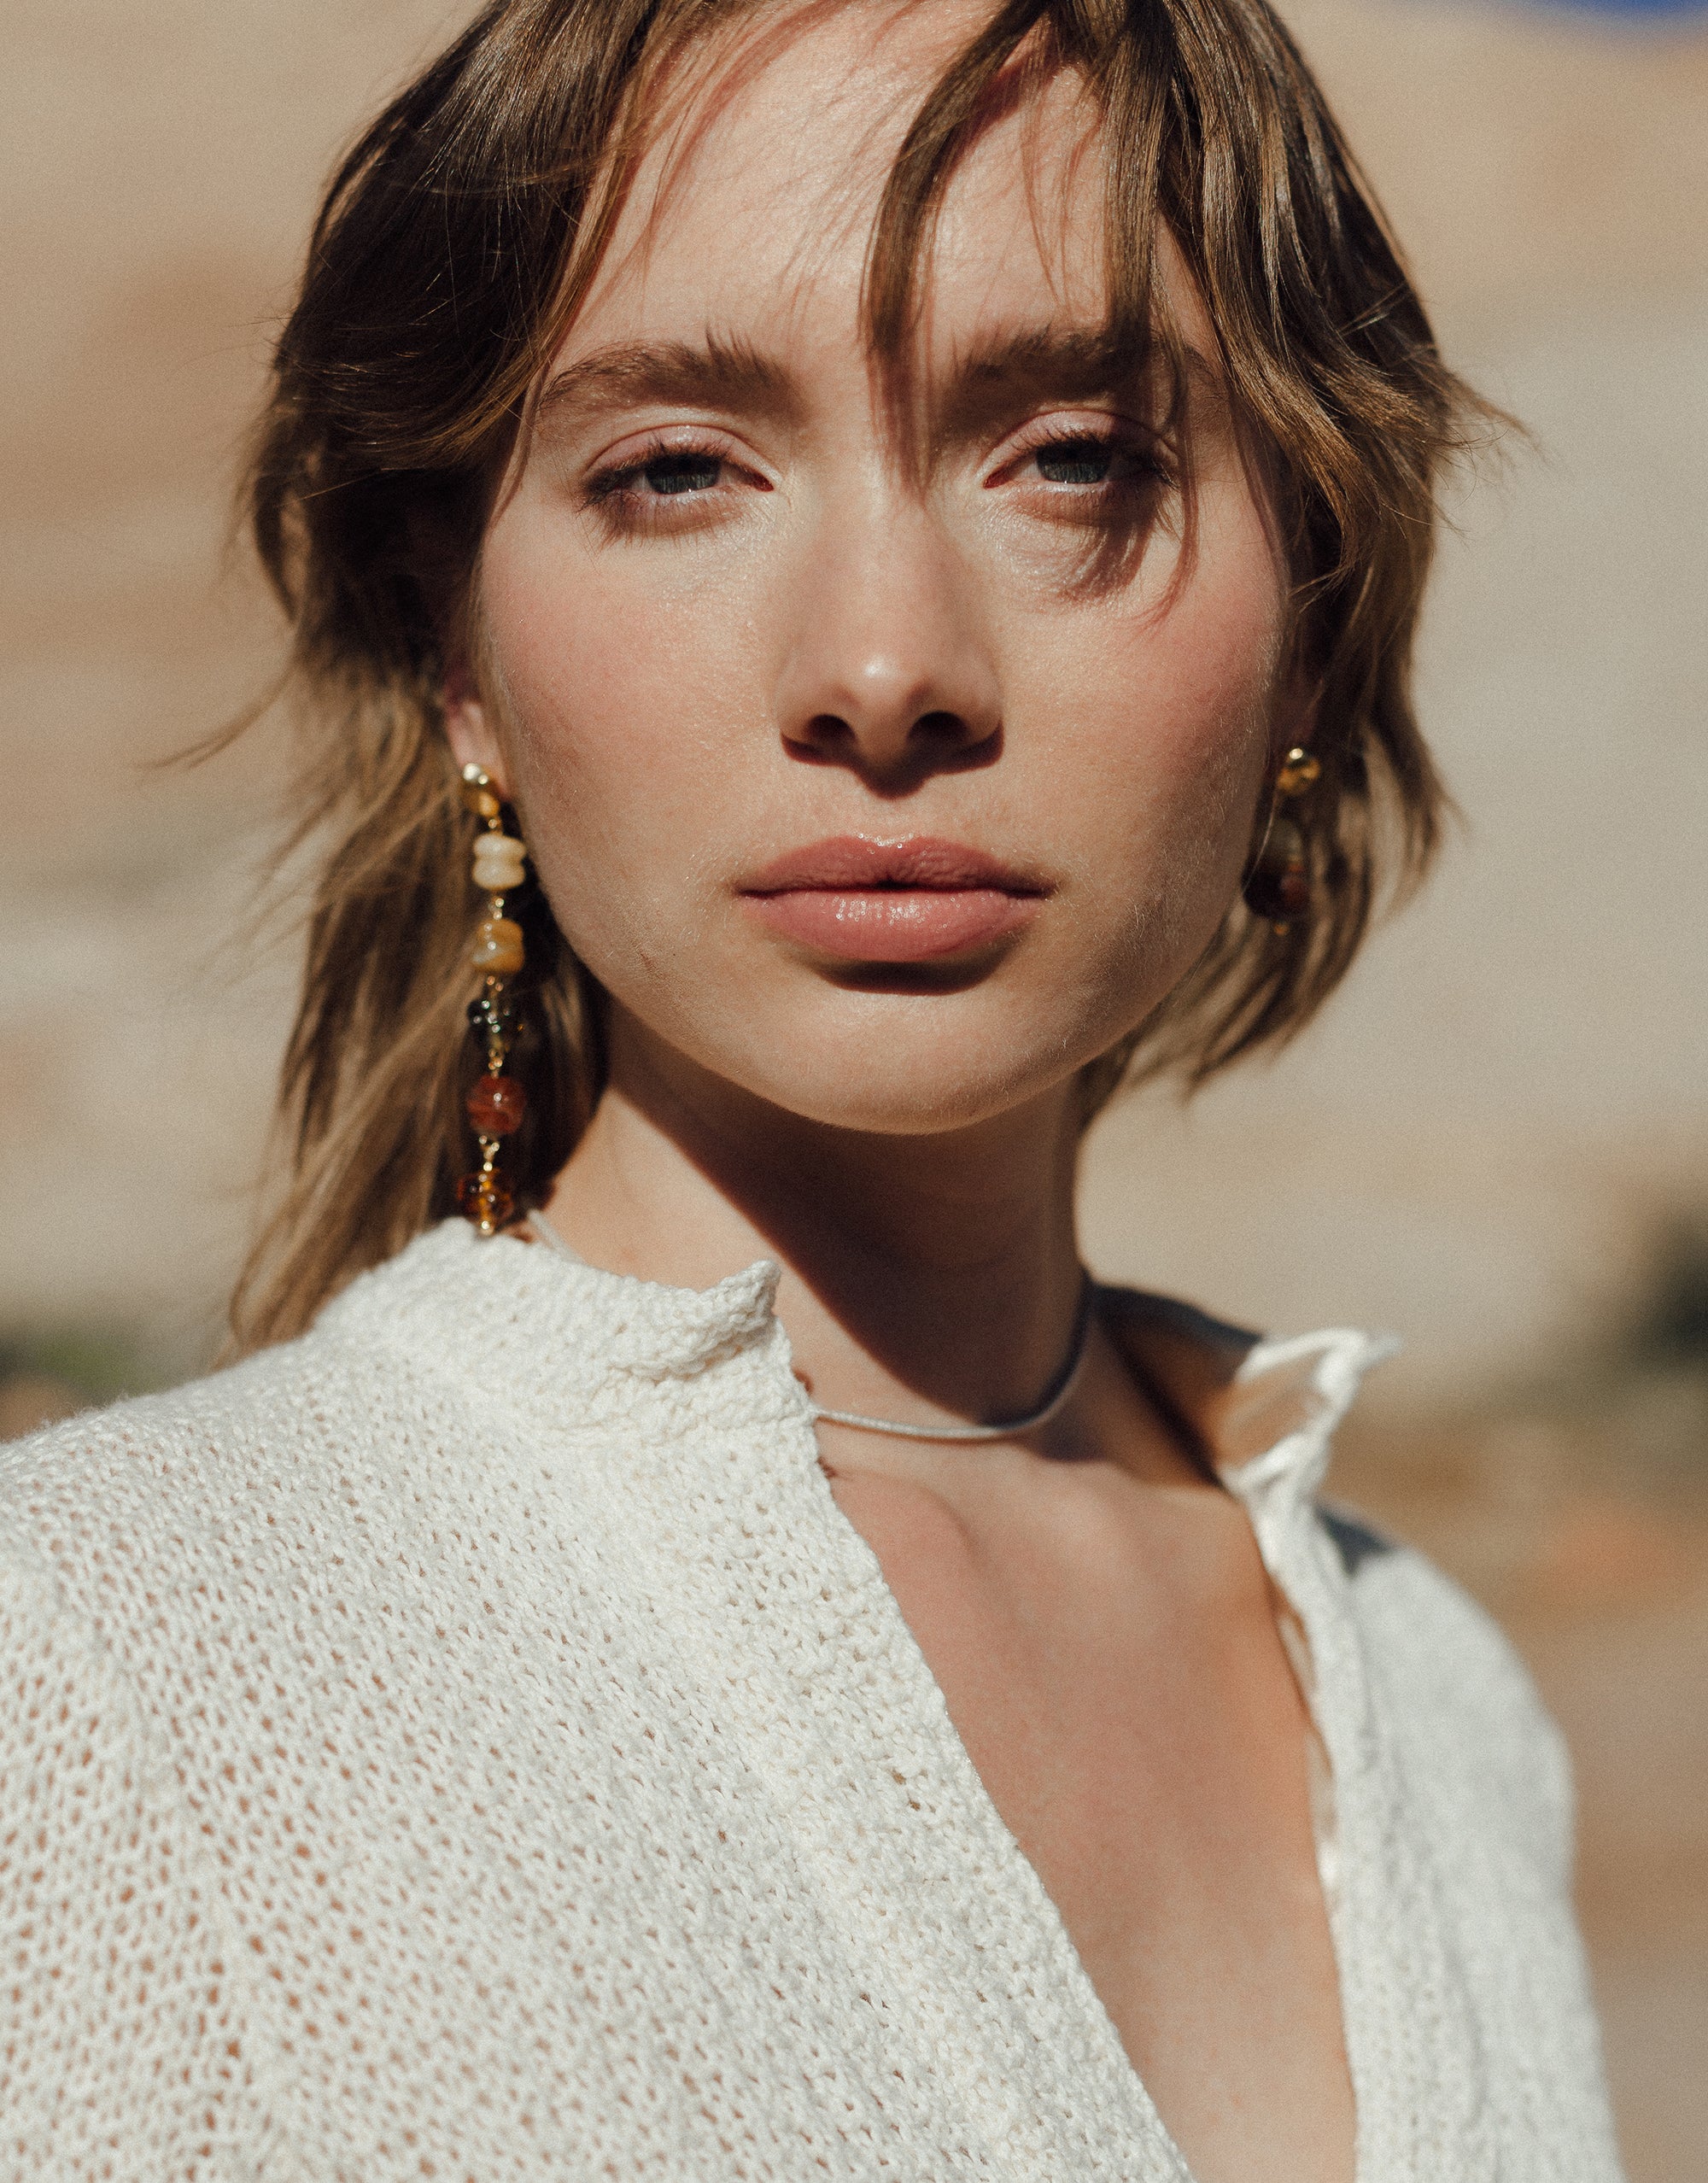 Shades of Nature | Sandstone Earrings